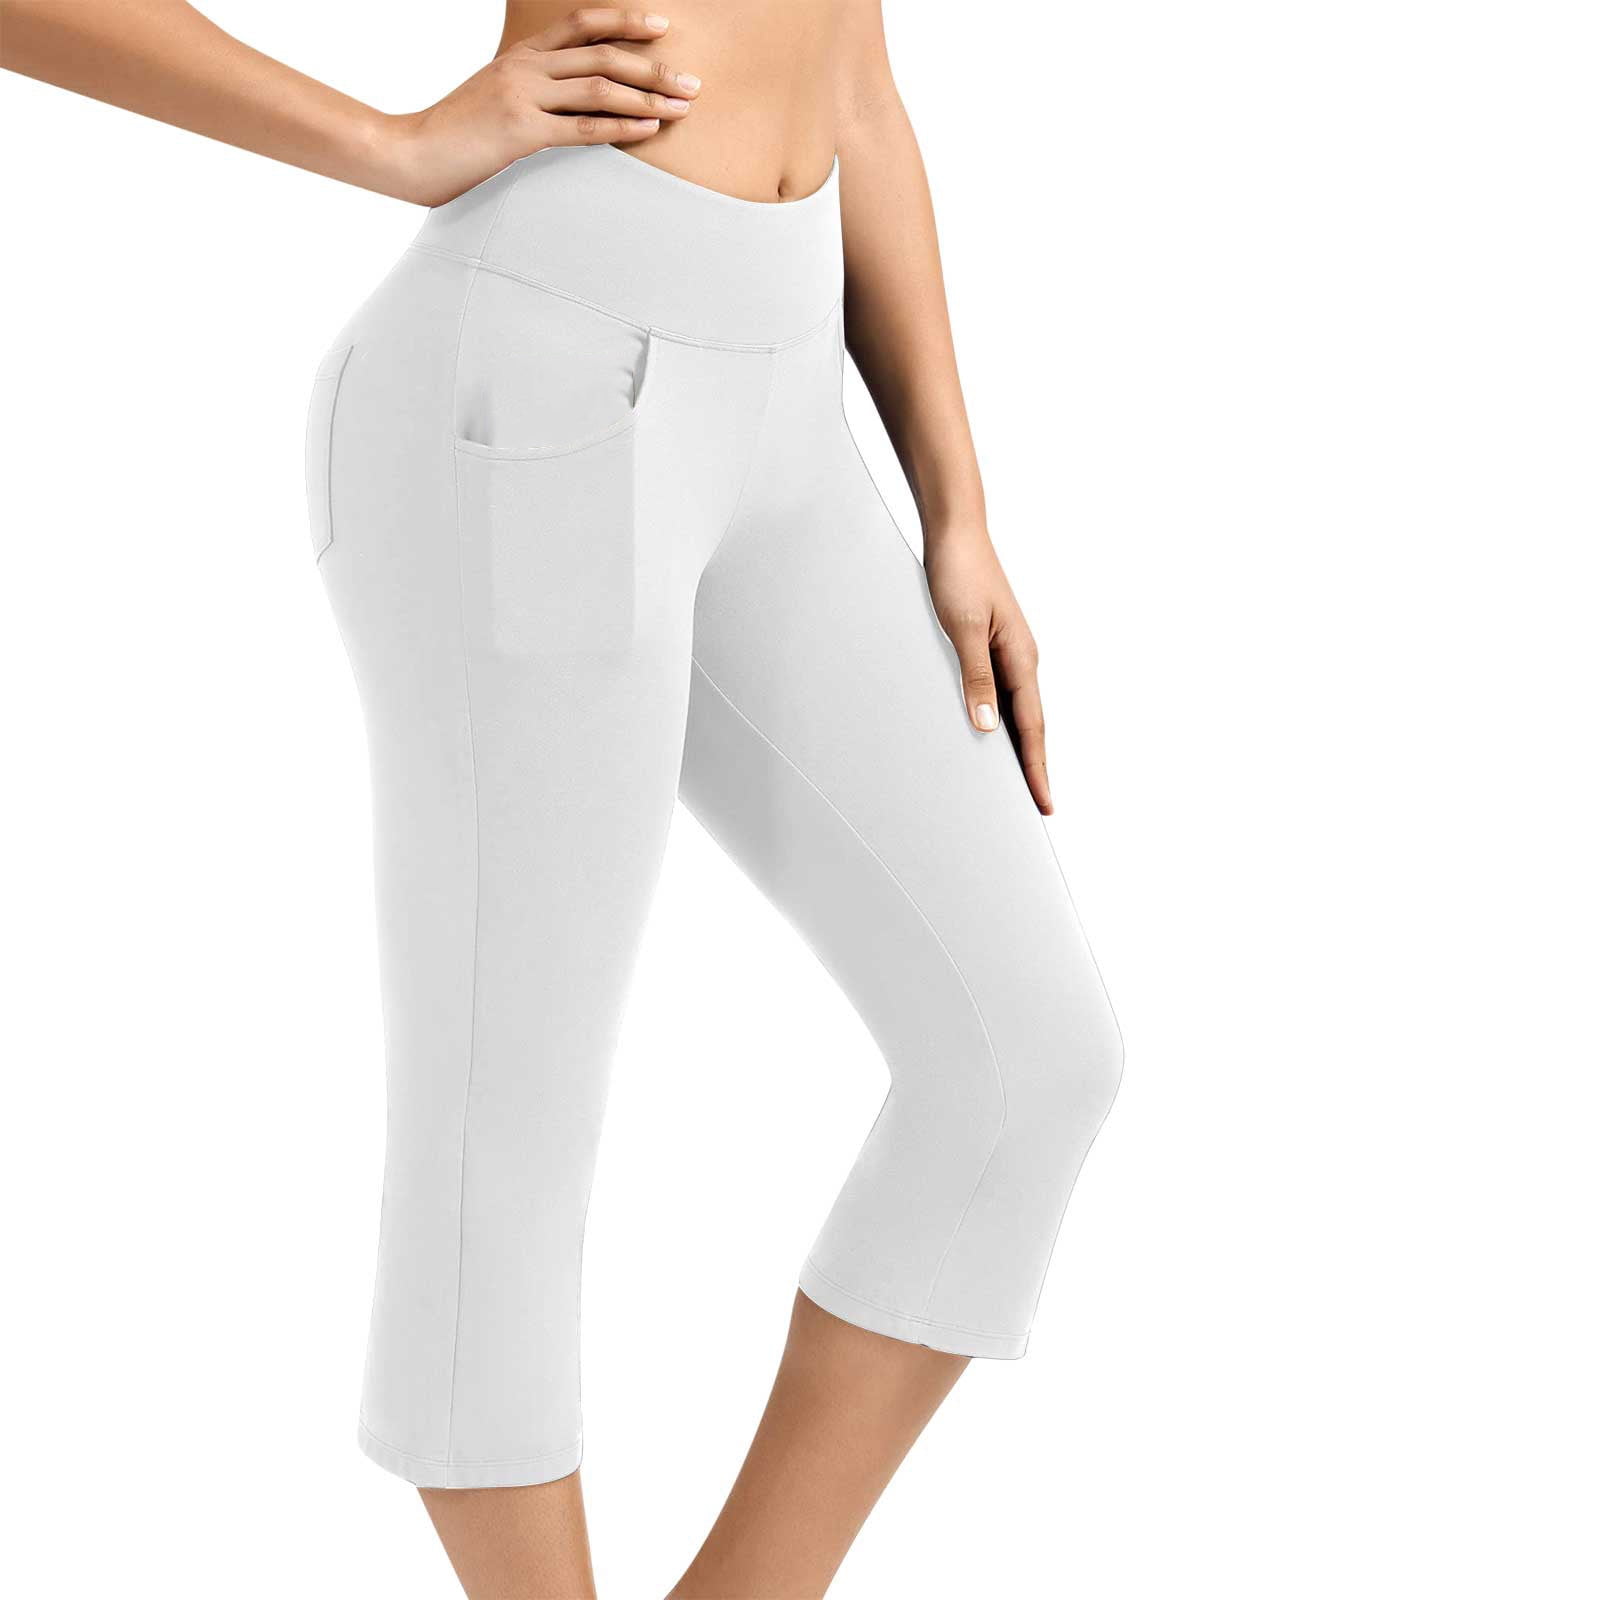 Yoga Basic Solid Color Yoga Leggings With Butt Lift